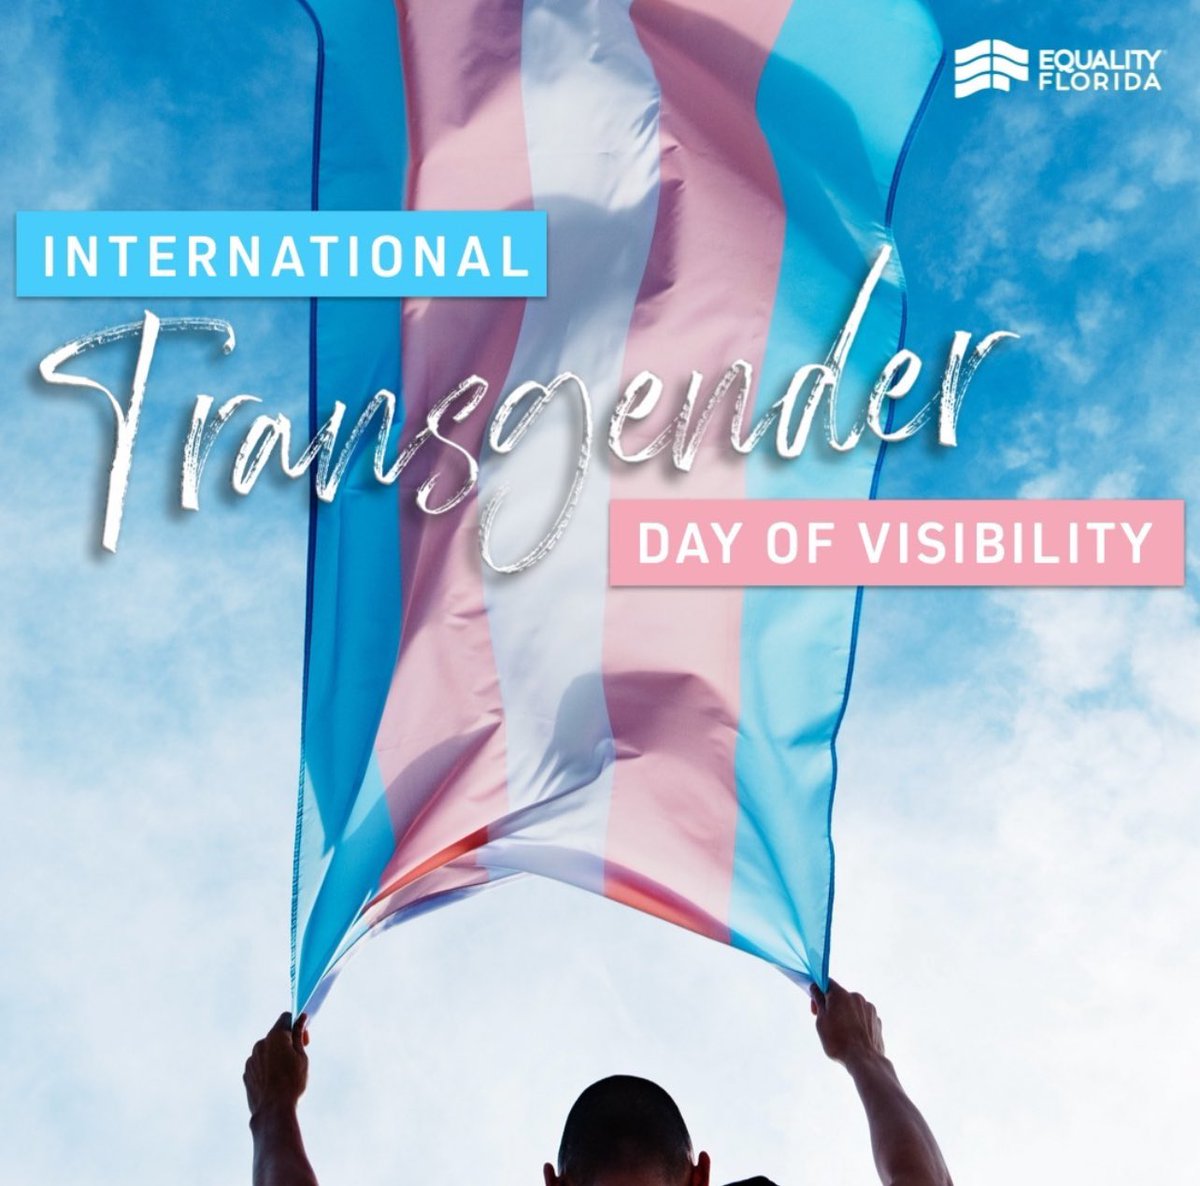 Happy International Transgender Day of Visibility! Today and every day, we celebrate the resilience and strength of our transgender community! 🏳️‍⚧️ #TransDayofVisibility #WeSeeYou #TransRightsAreHumanRights #ProtectTransYouth #EqualityFlorida